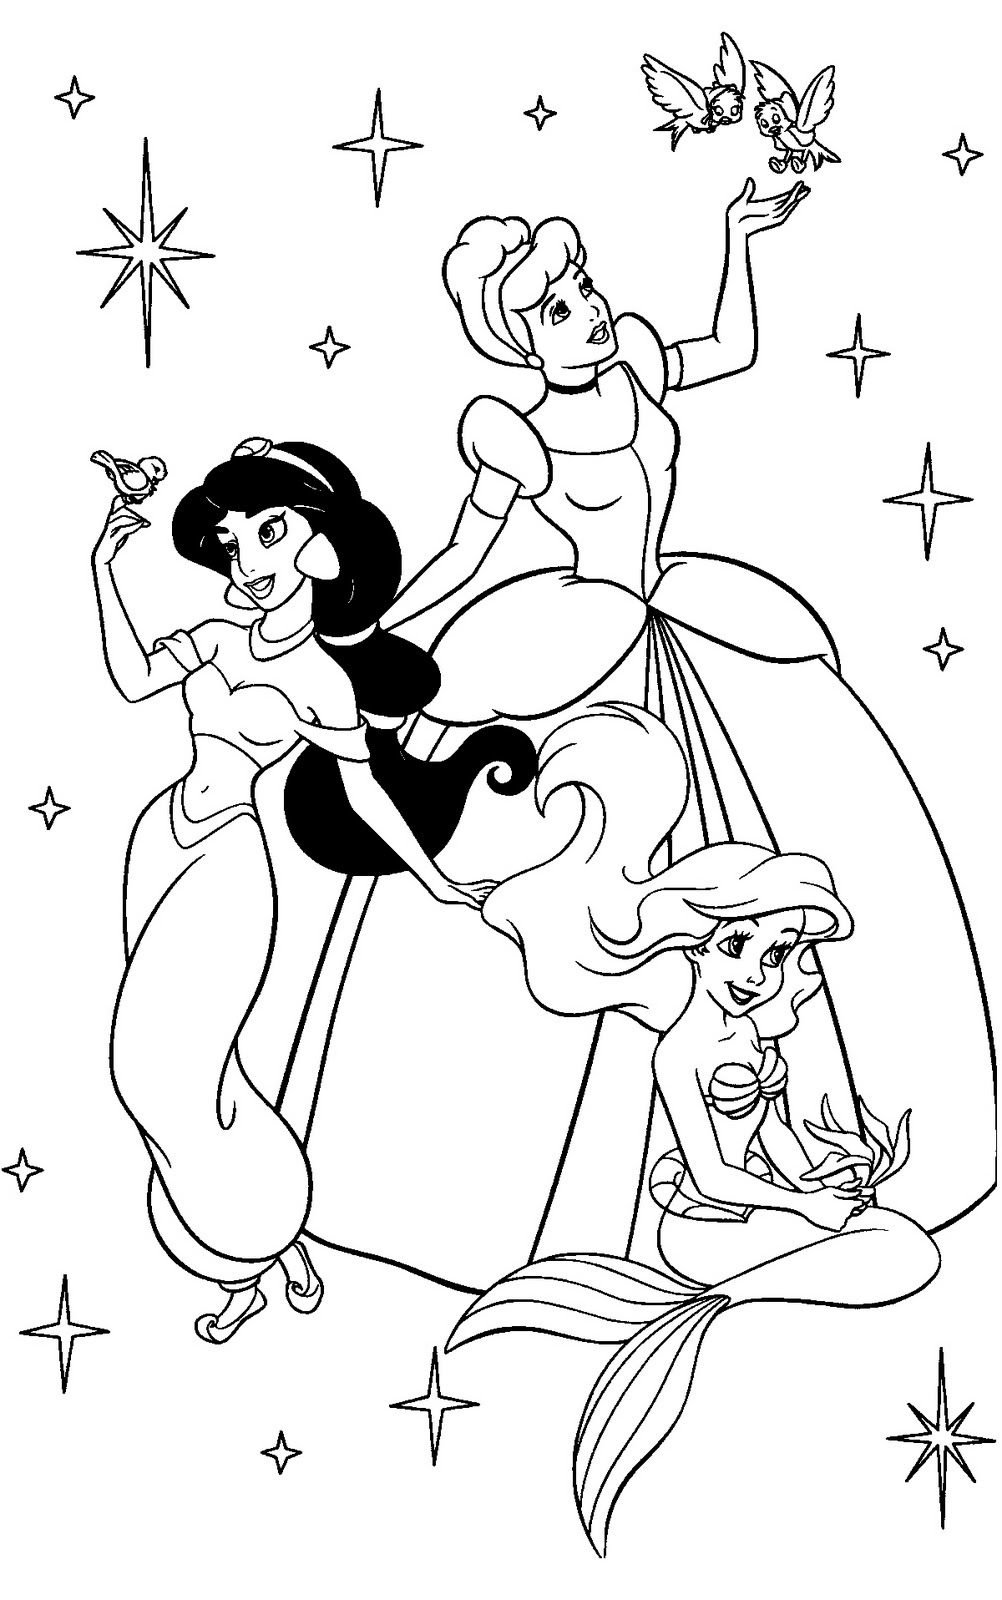 Disney Princesses Best Coloring Pages Free Coloring BEDECOR Free Coloring Picture wallpaper give a chance to color on the wall without getting in trouble! Fill the walls of your home or office with stress-relieving [bedroomdecorz.blogspot.com]